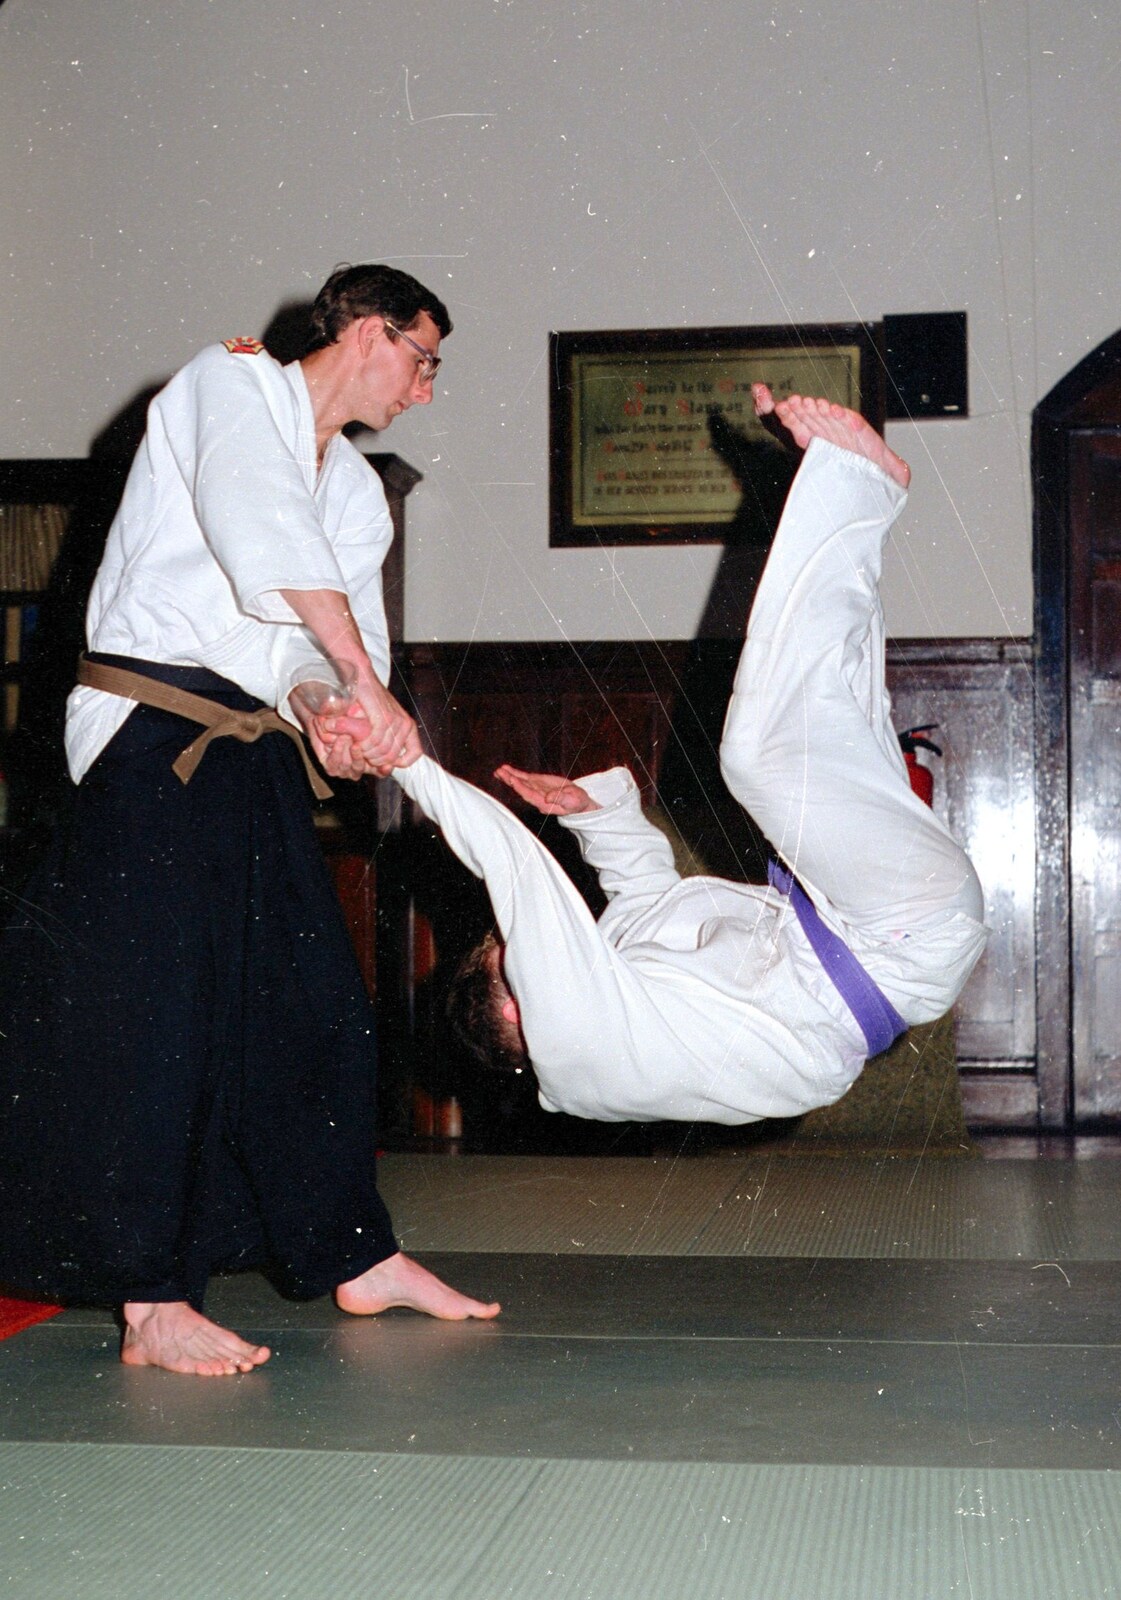 Dobbs lobs someone over on to the mat from Uni: Dartmoor Night and Day, Dartmouth and a bit of Jiu Jitsu, Devon - 29th April 1989